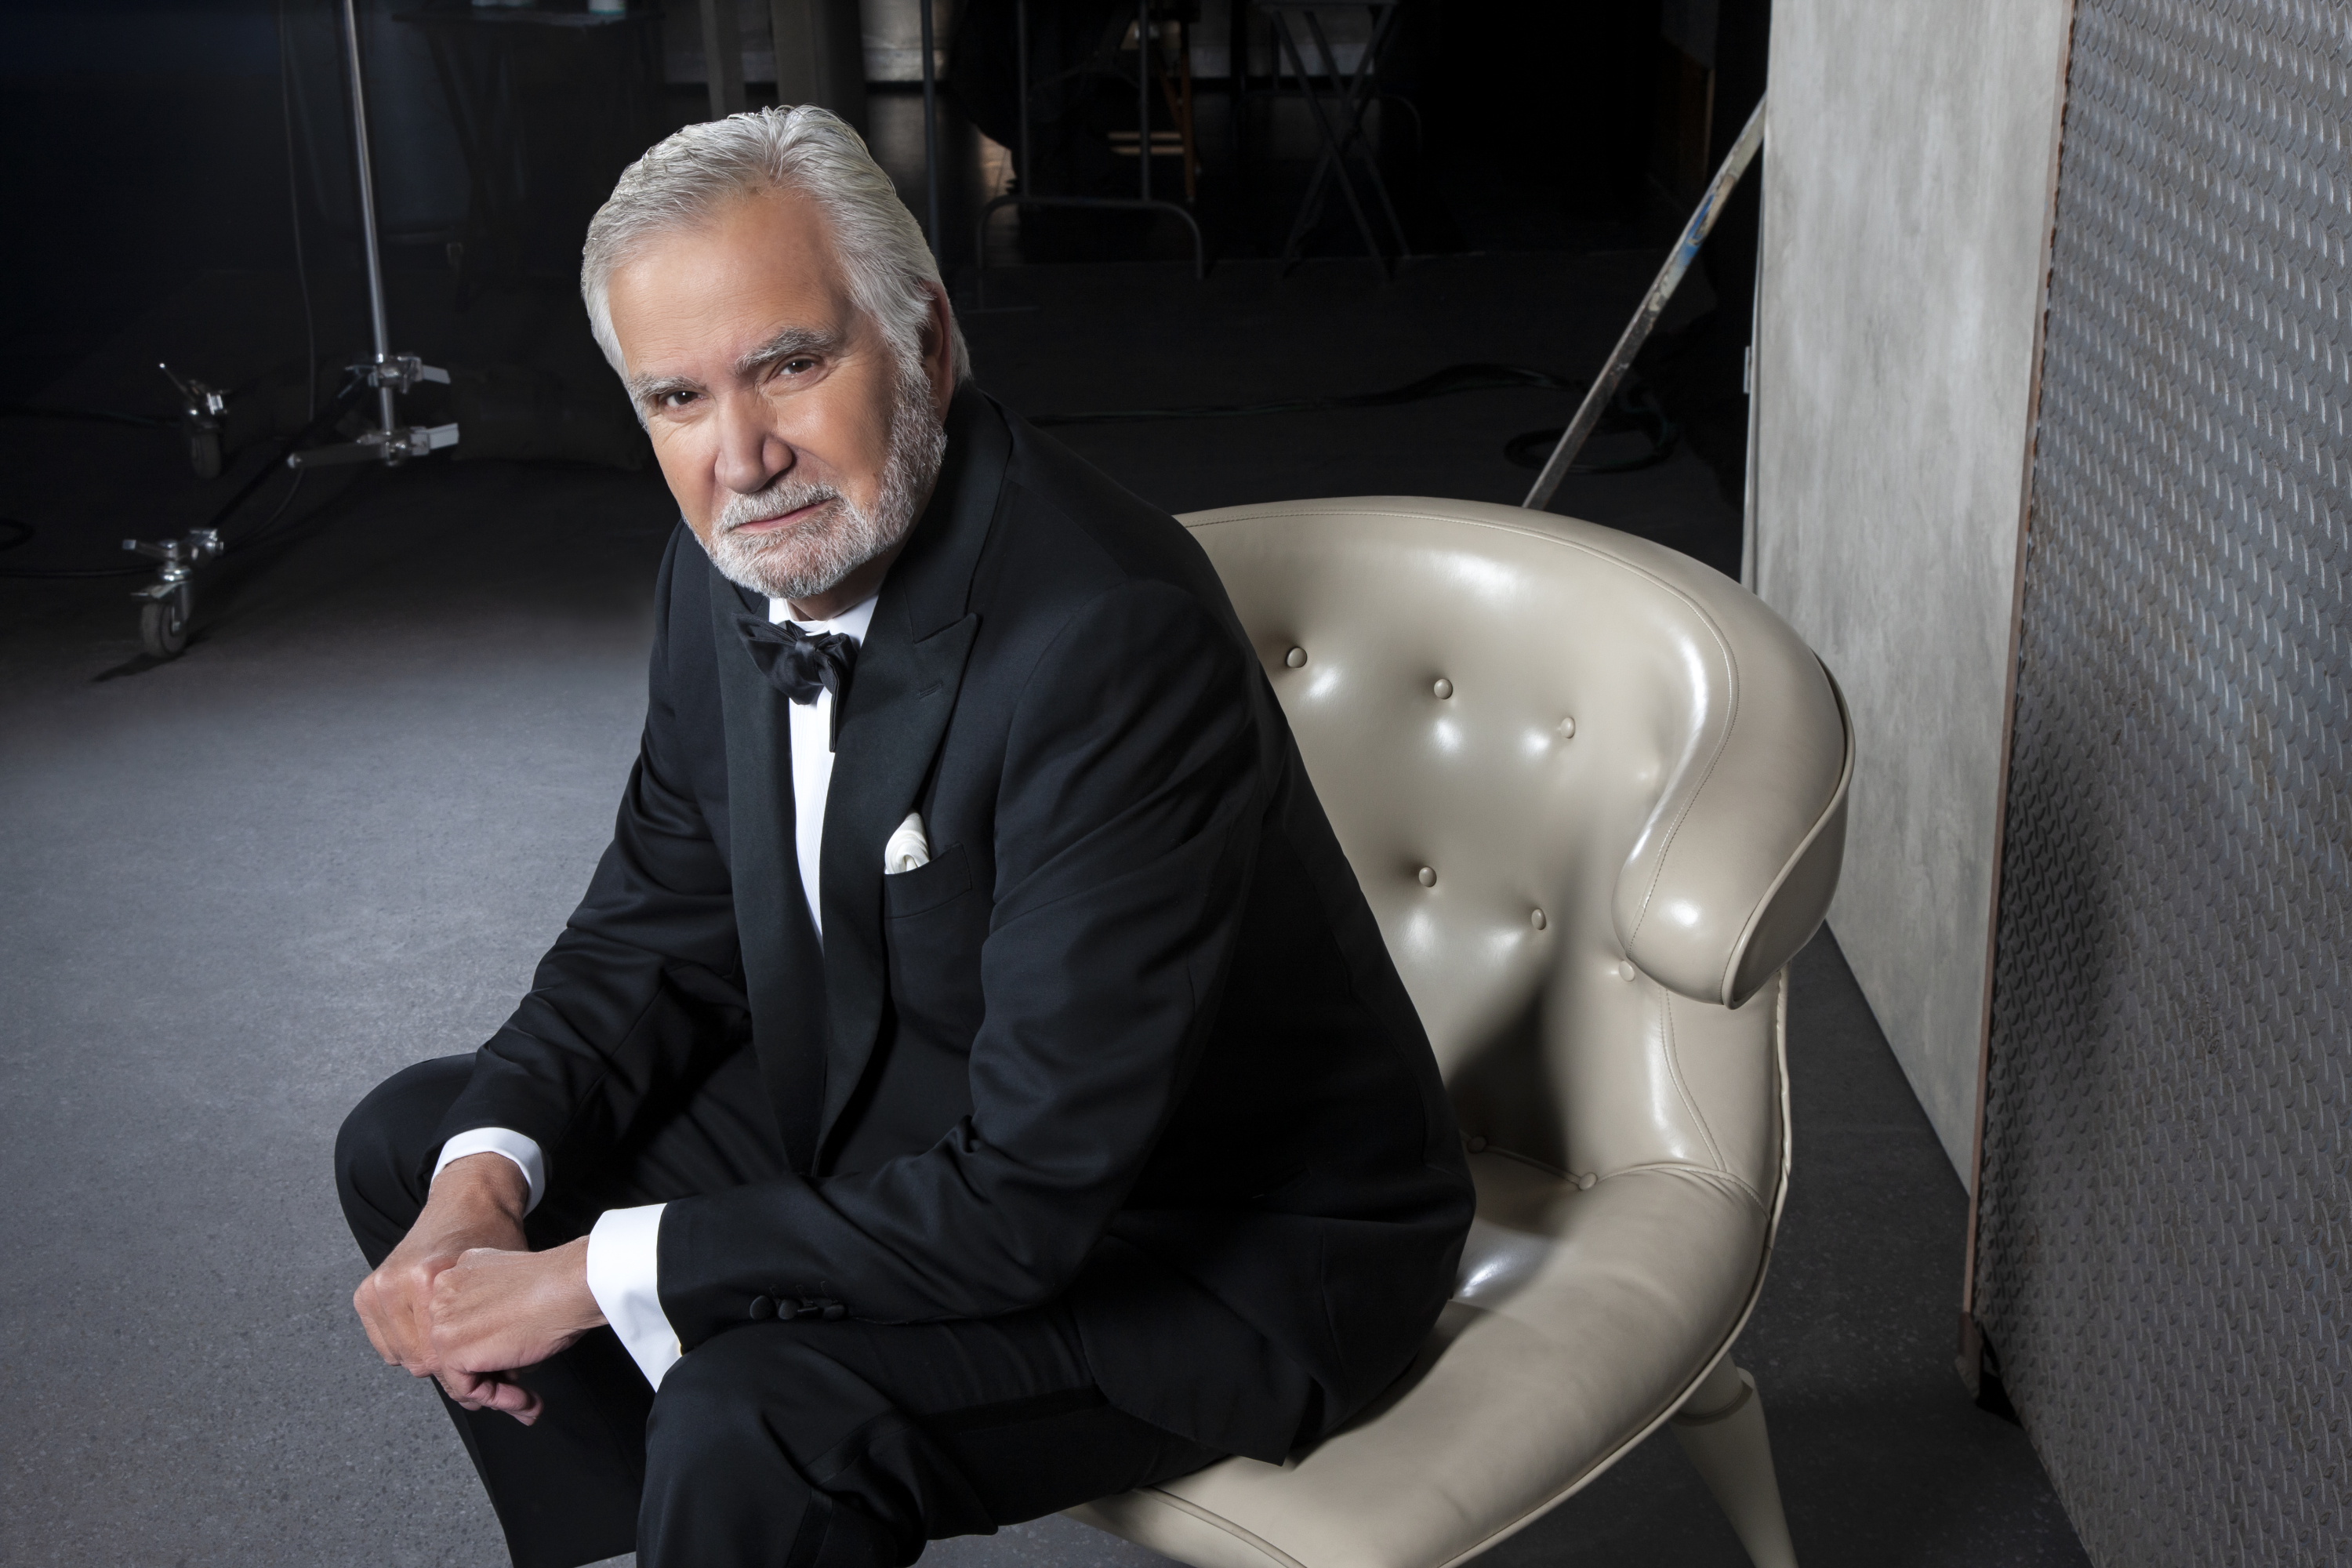 'The Bold and the Beautiful' actor John McCook wearing a tuxedo and sitting in a grey chair.